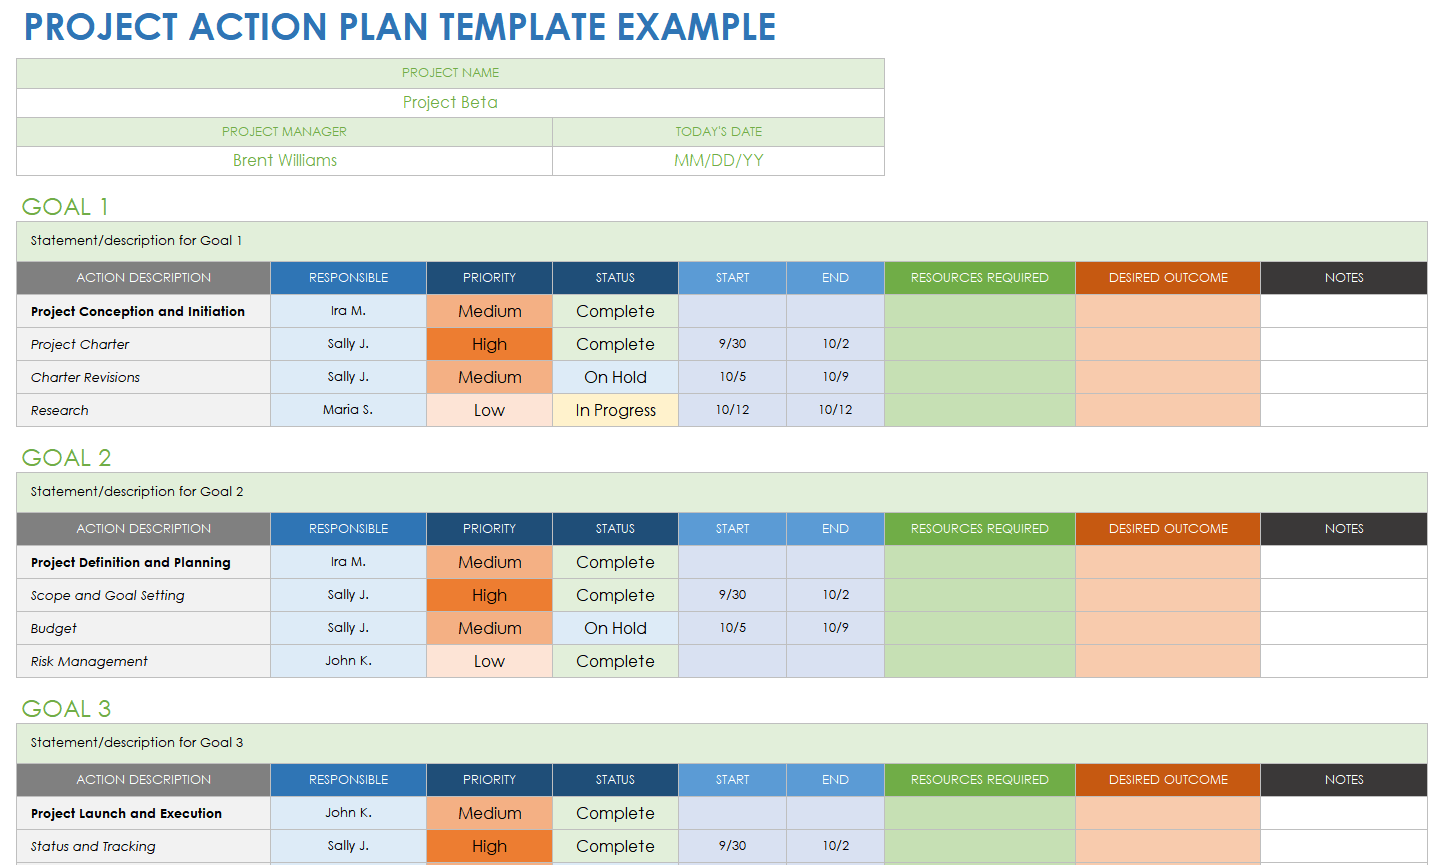 Project Action Plan Example Template